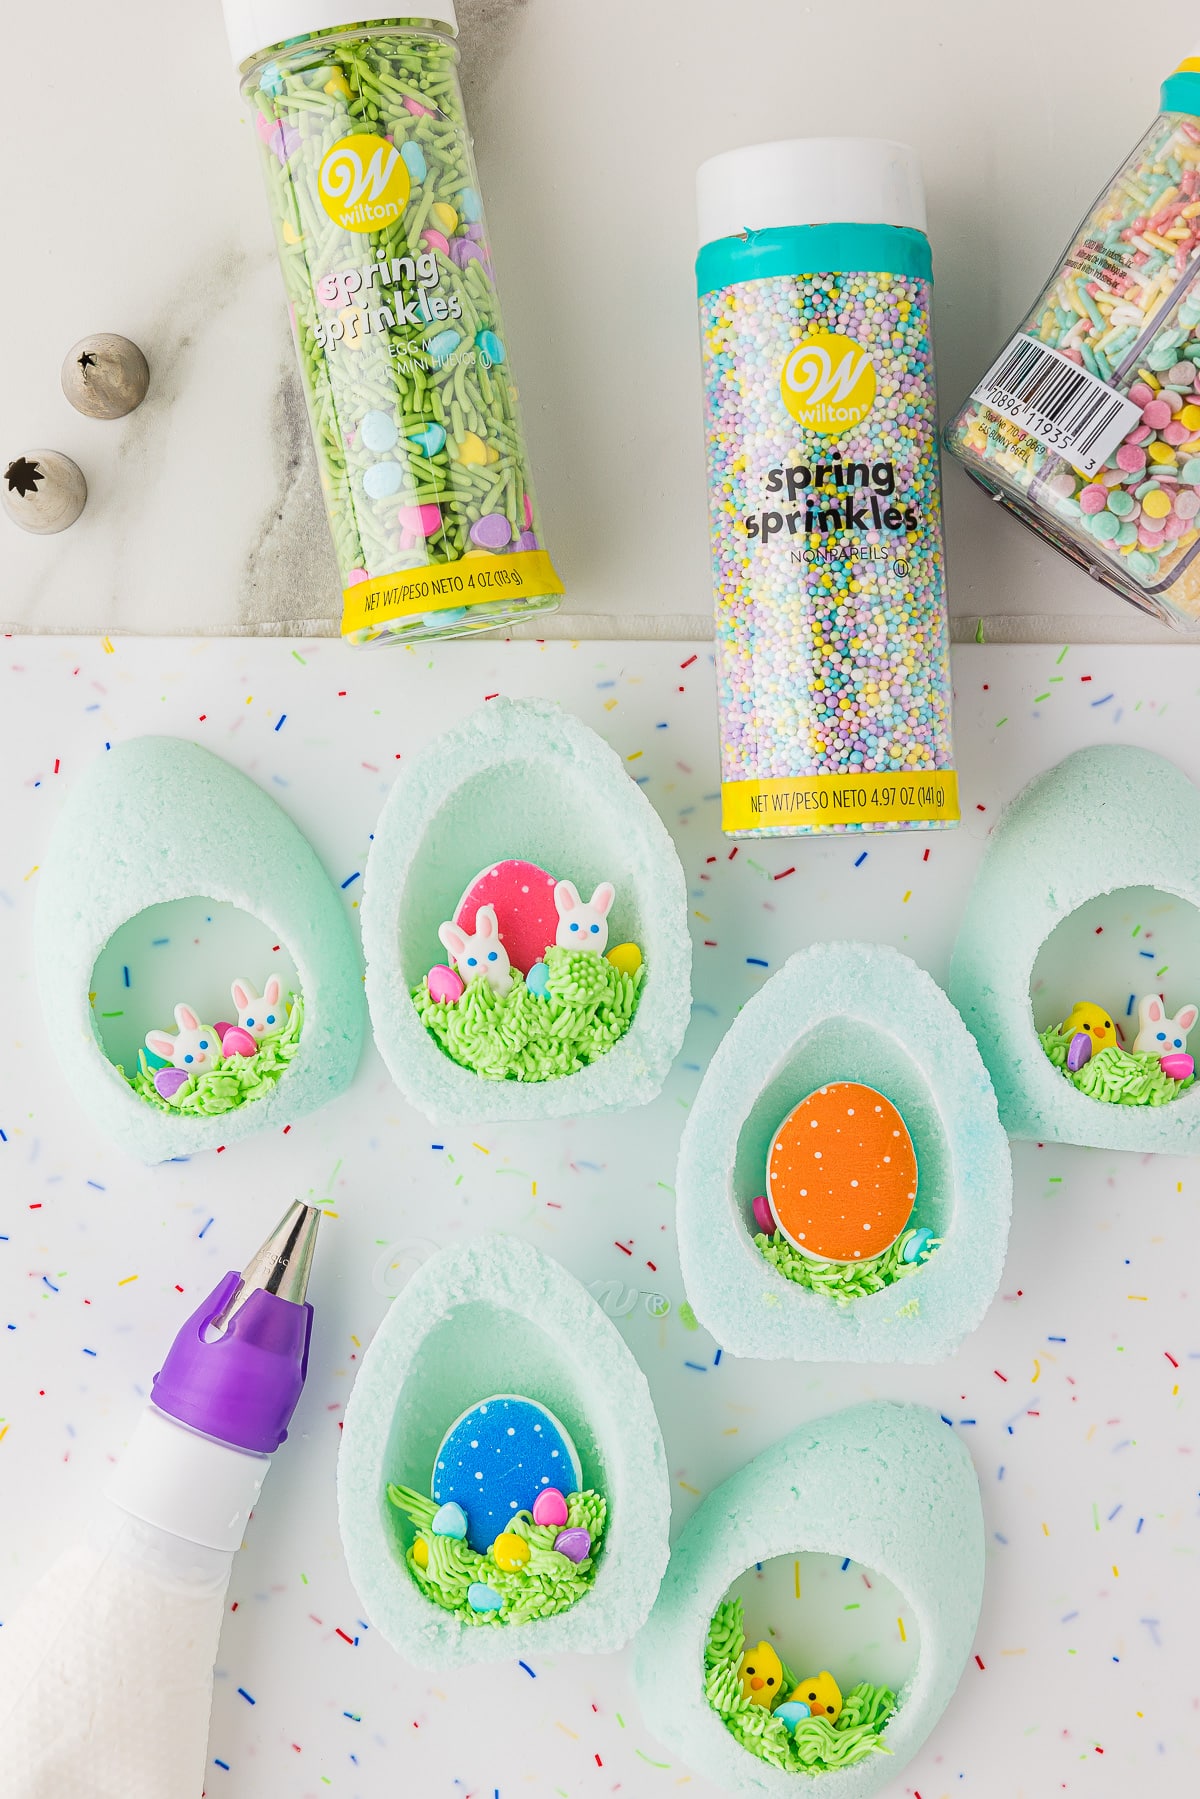 Several carved out sugar Easter eggs with sprinkles and candy decorations